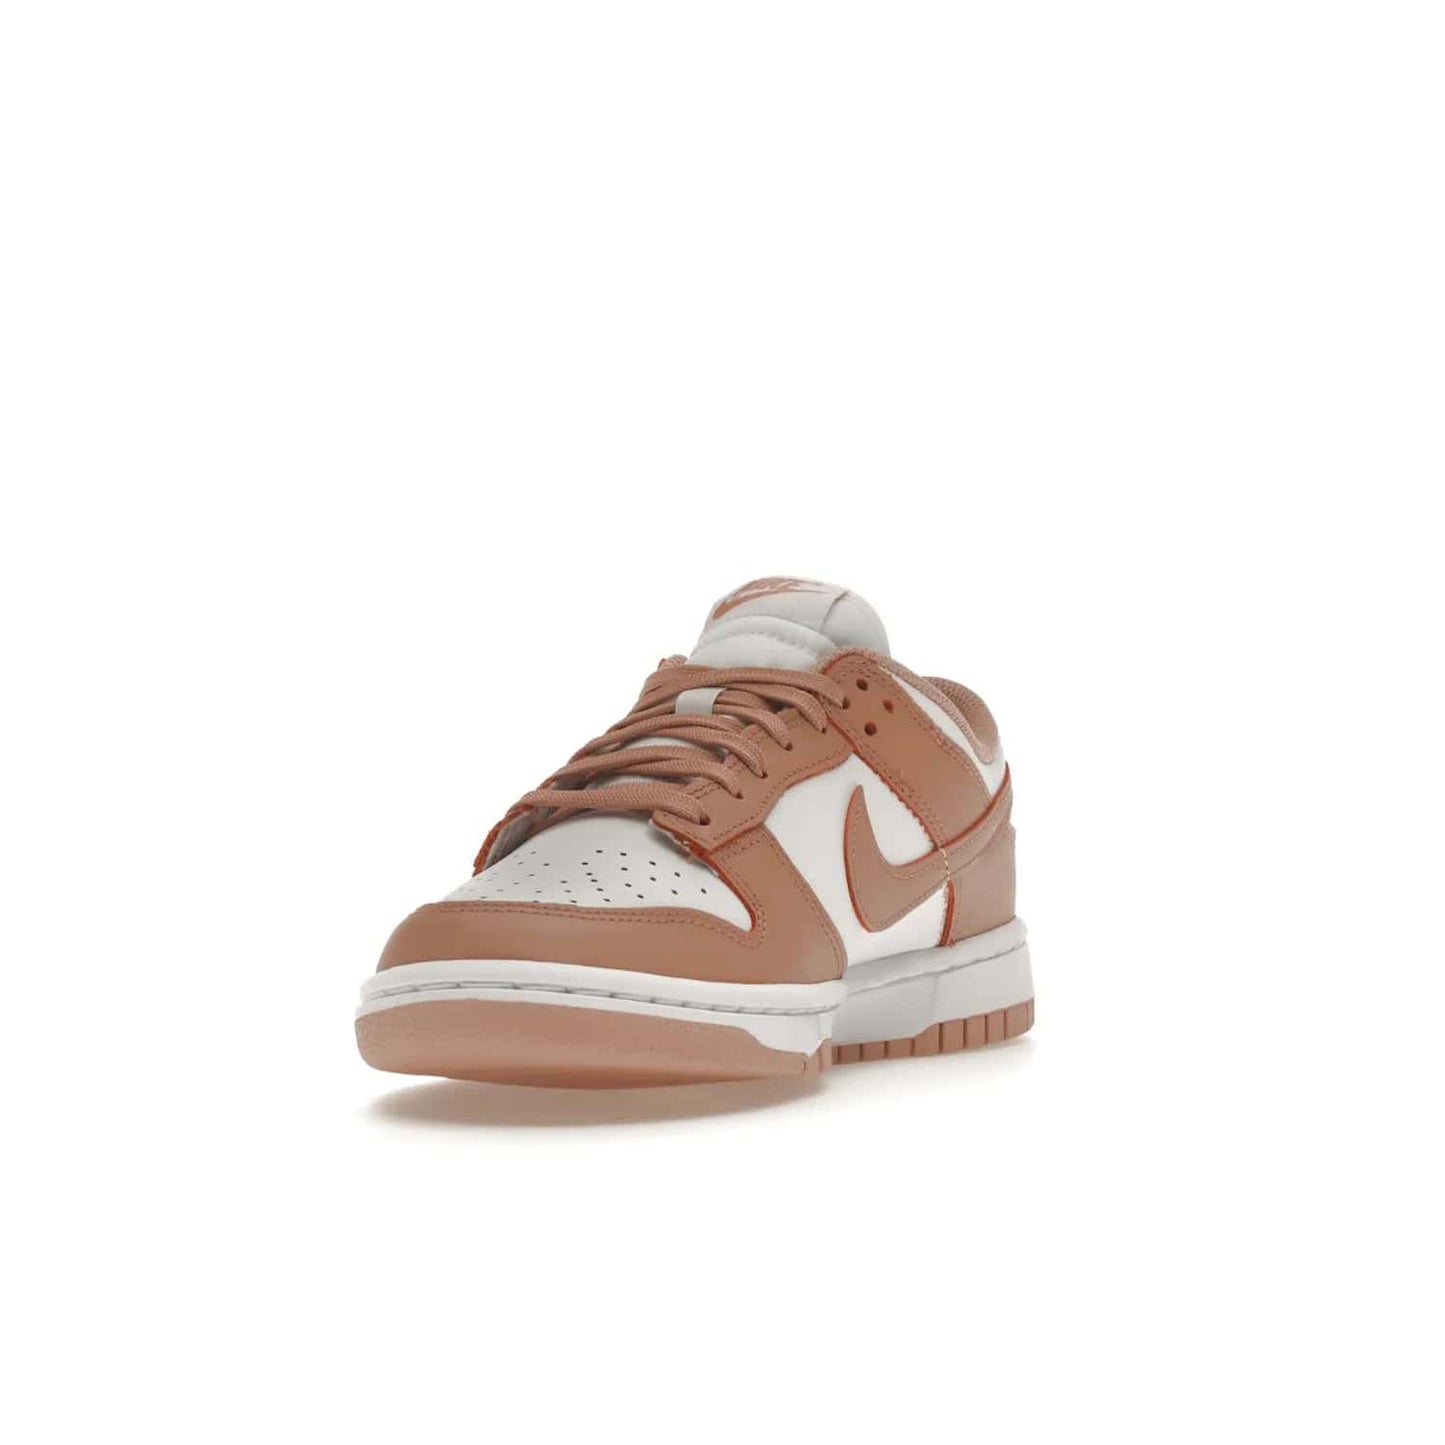 Nike Dunk Low Rose Whisper (Women's) - Image 13 - Only at www.BallersClubKickz.com - The Nike Dunk Low Rose Whisper is the perfect summer shoe with classic two-tone look and vintage-inspired design. Features white and Rose Whisper leather upper, woven tongue labels and EVA foam sole for plush cushioning. Available June 2022 at $100.